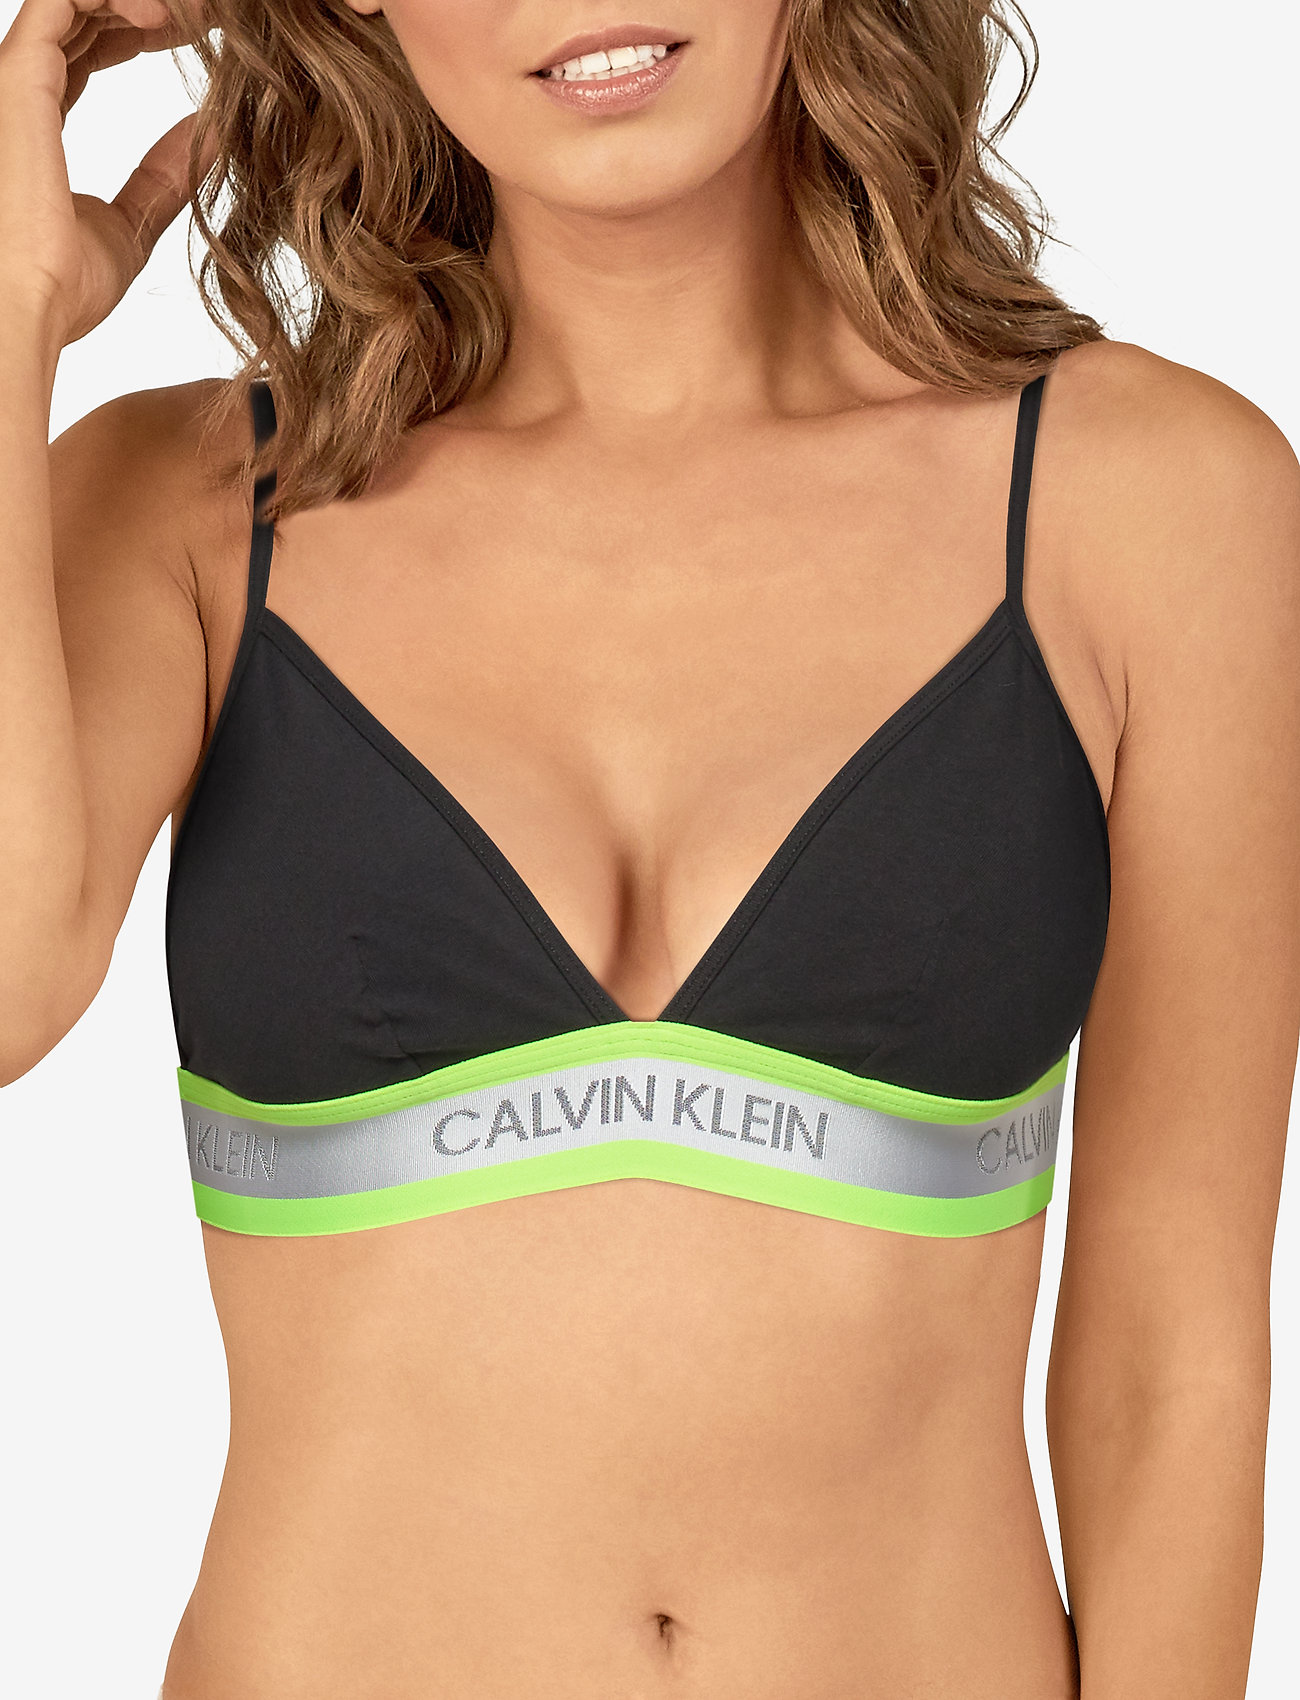 calvin klein unlined triangle